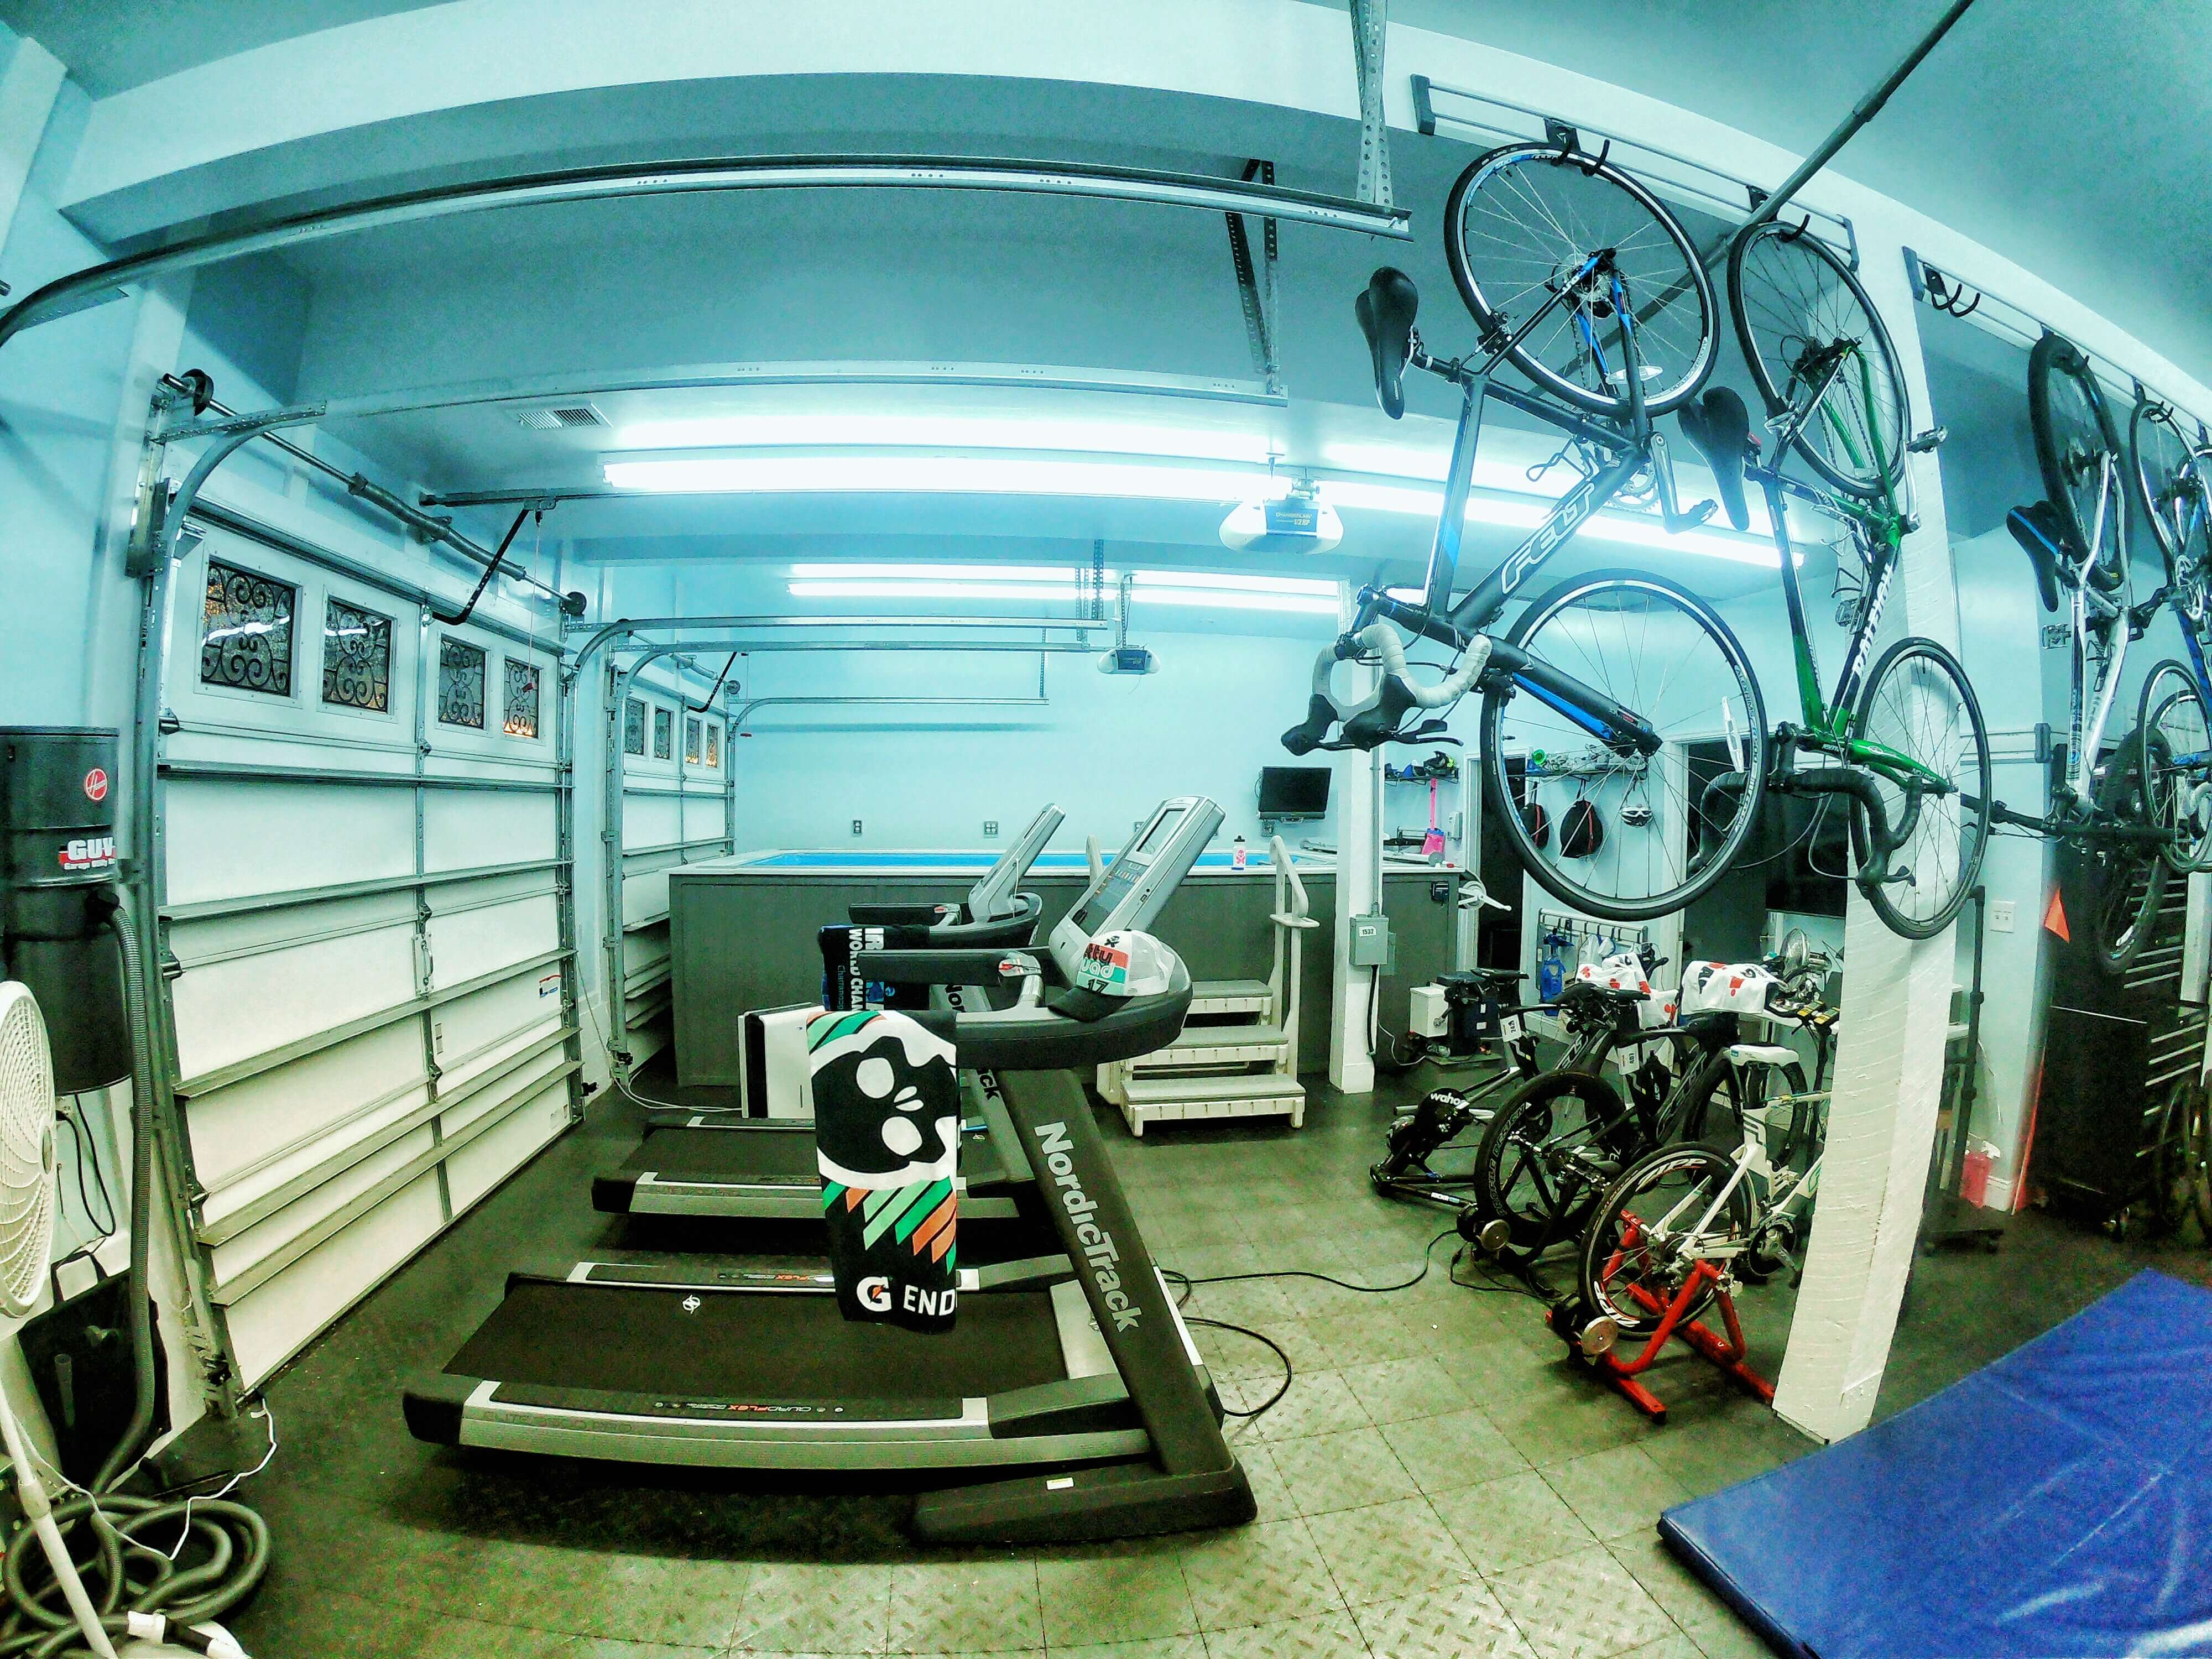 A family's garage 'pain cave' with aboveground Endless Pool, treadmills, and bicycles.